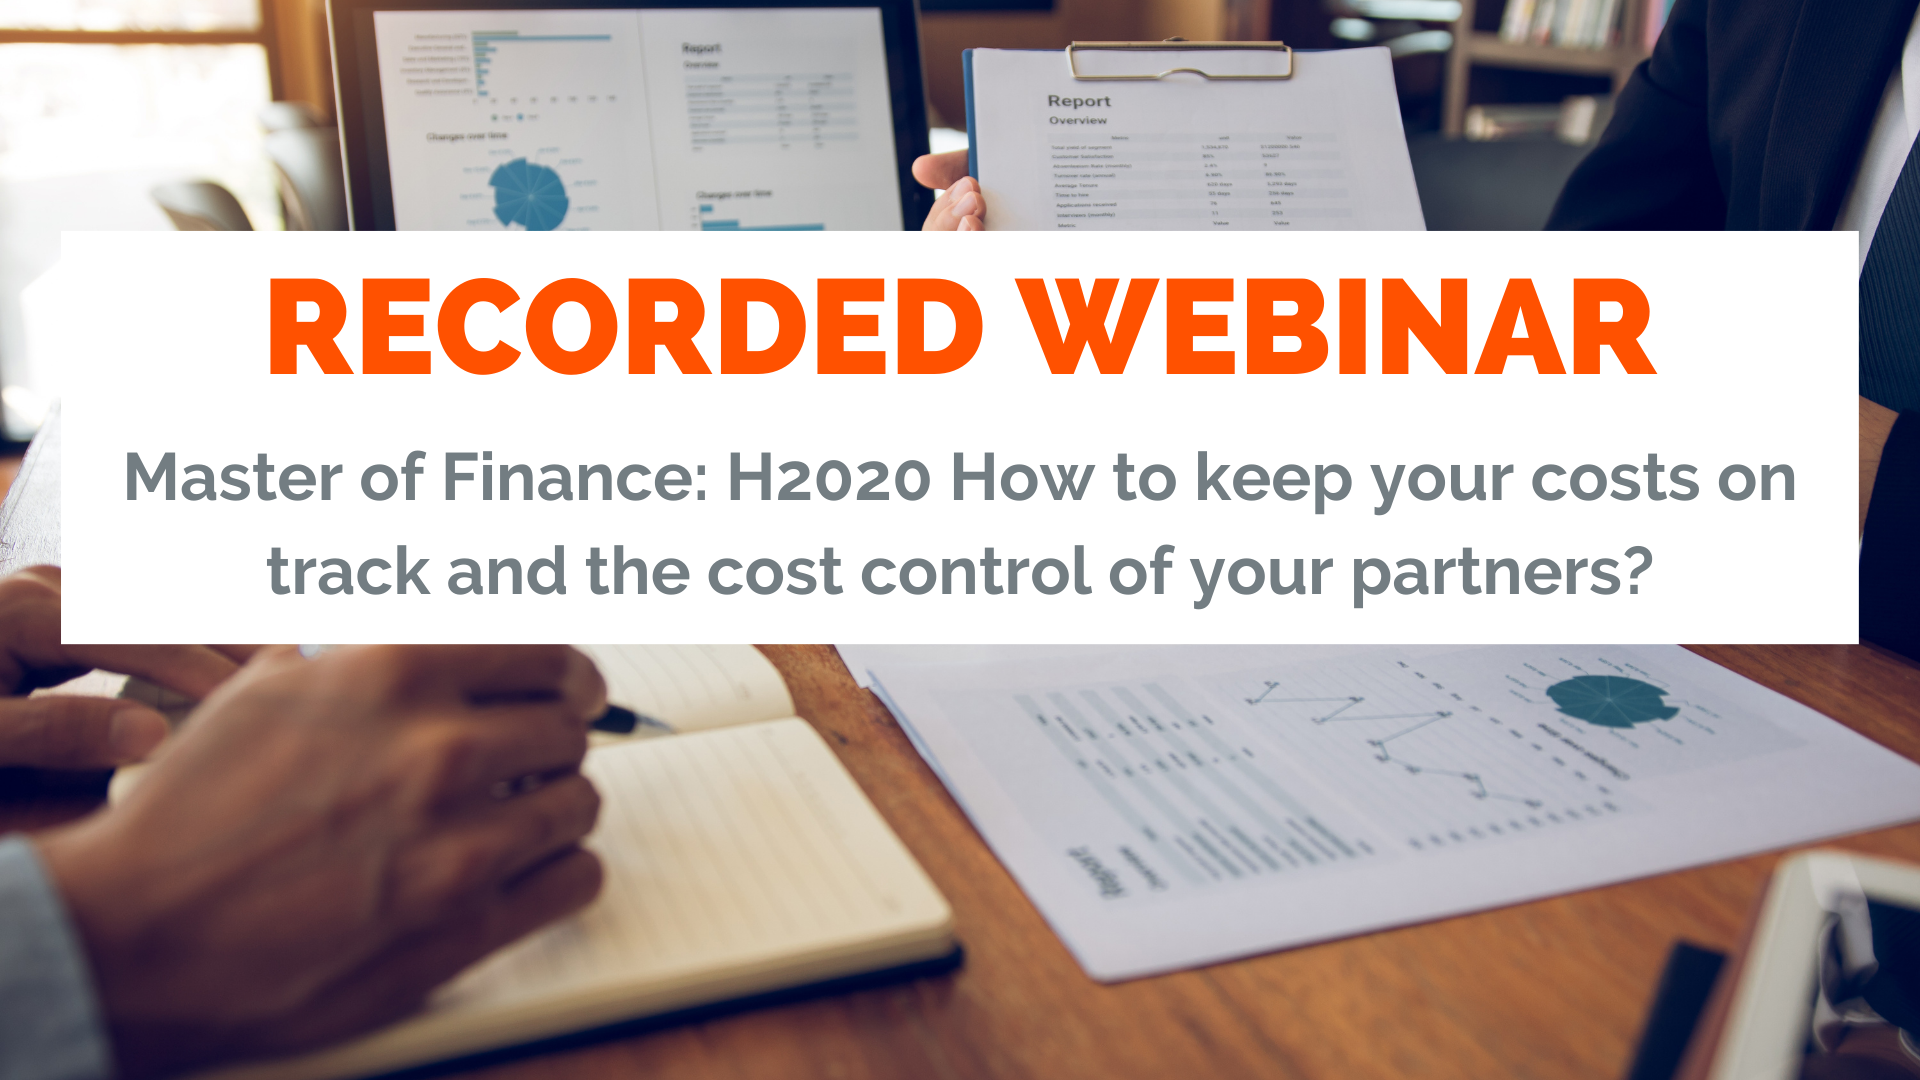 Master of Finance Horizon 2020  - How to keep your costs on track and the cost control of your partners?